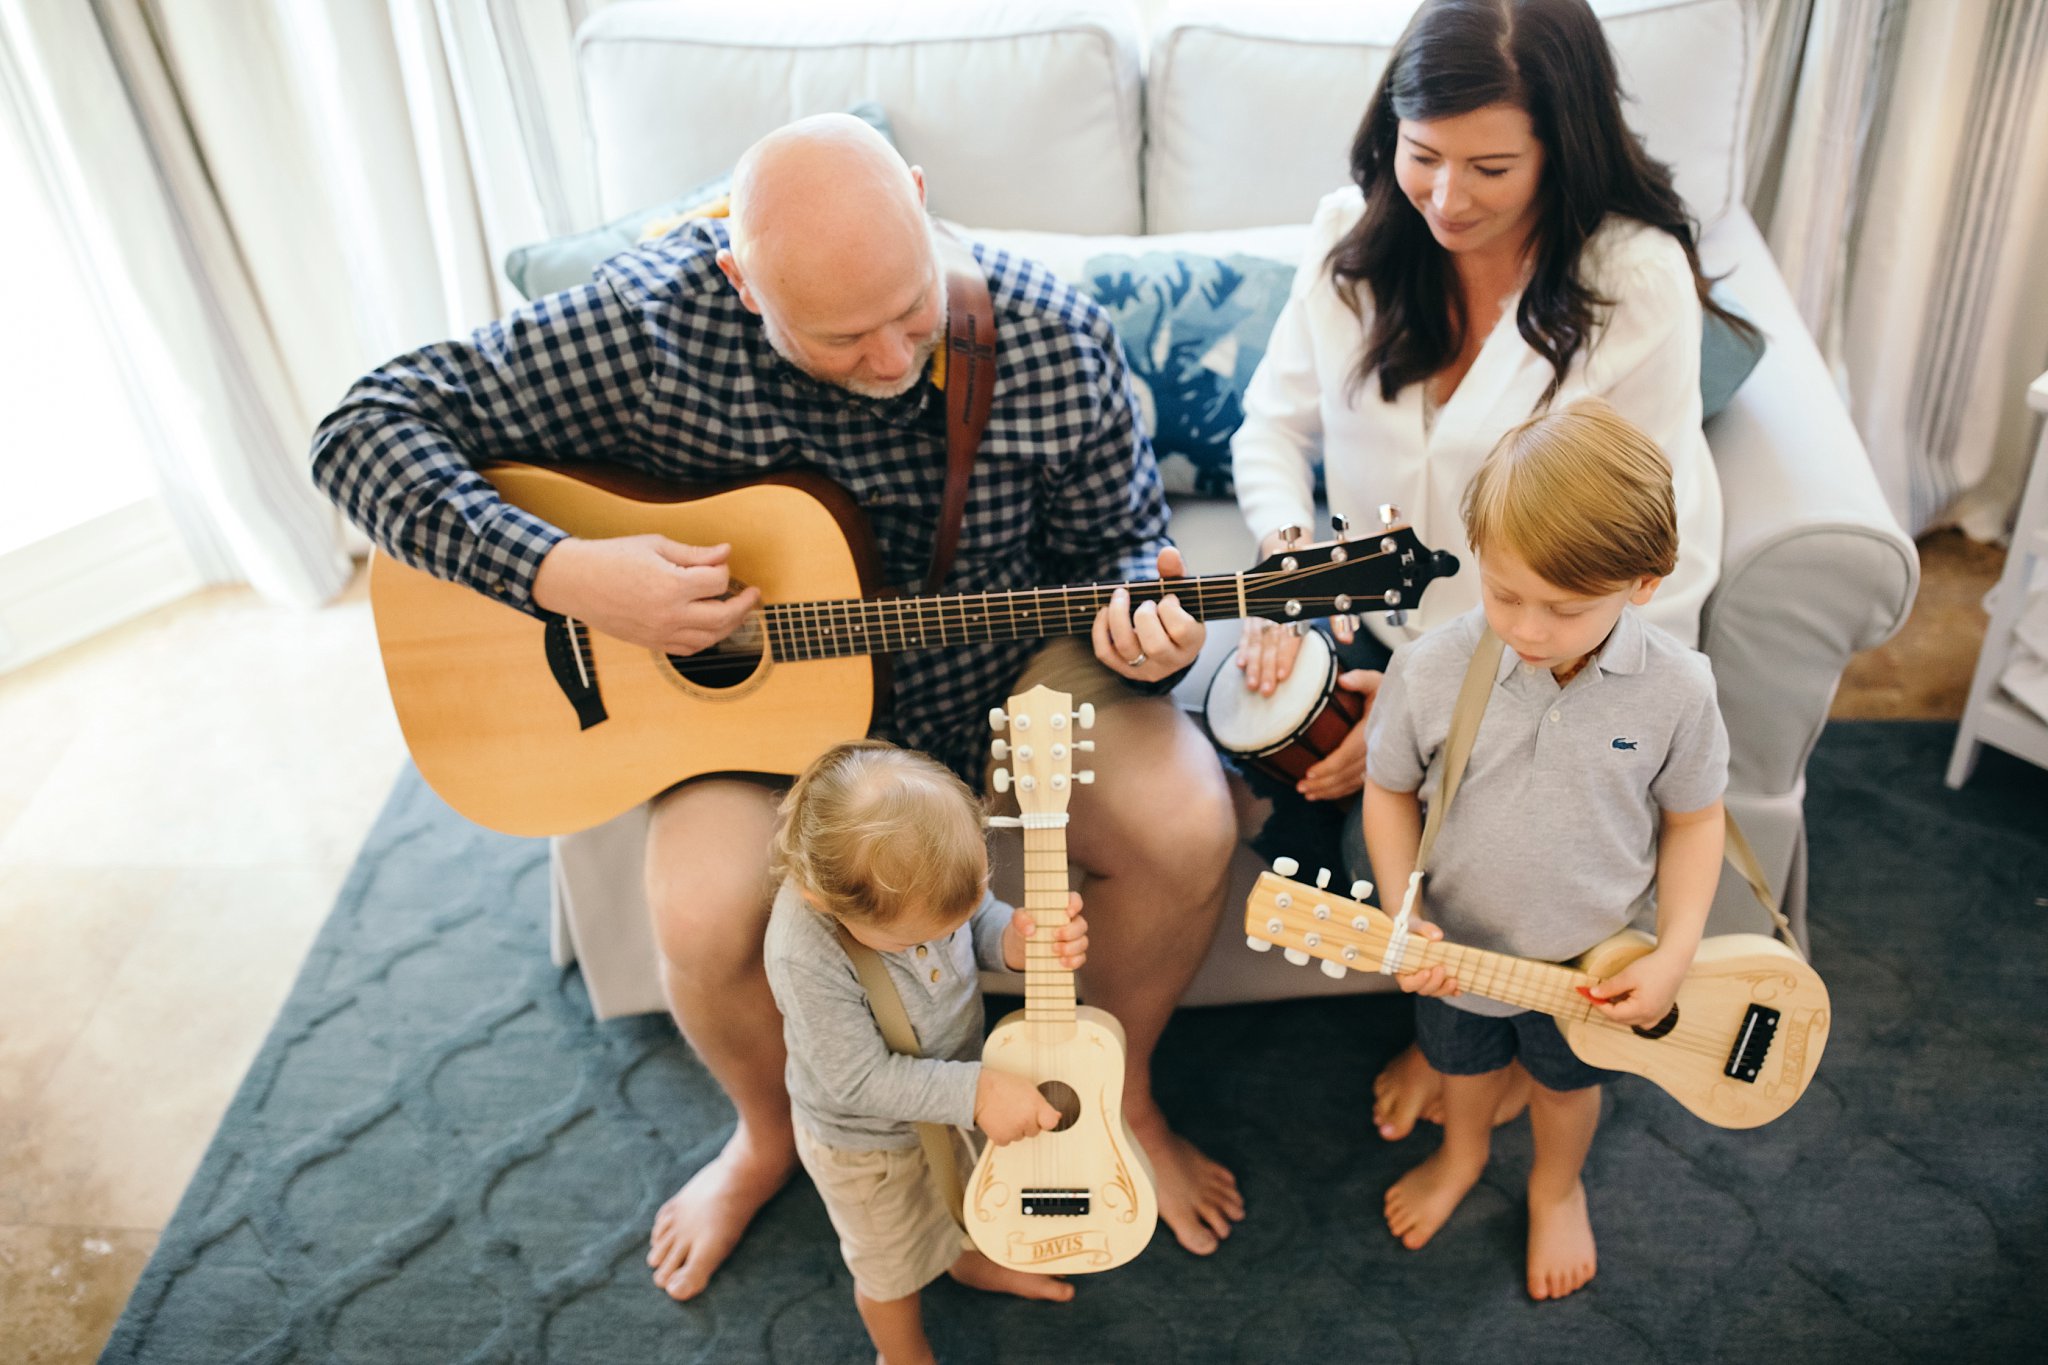 Family of 4 with 2 little boys playing instruments in living room